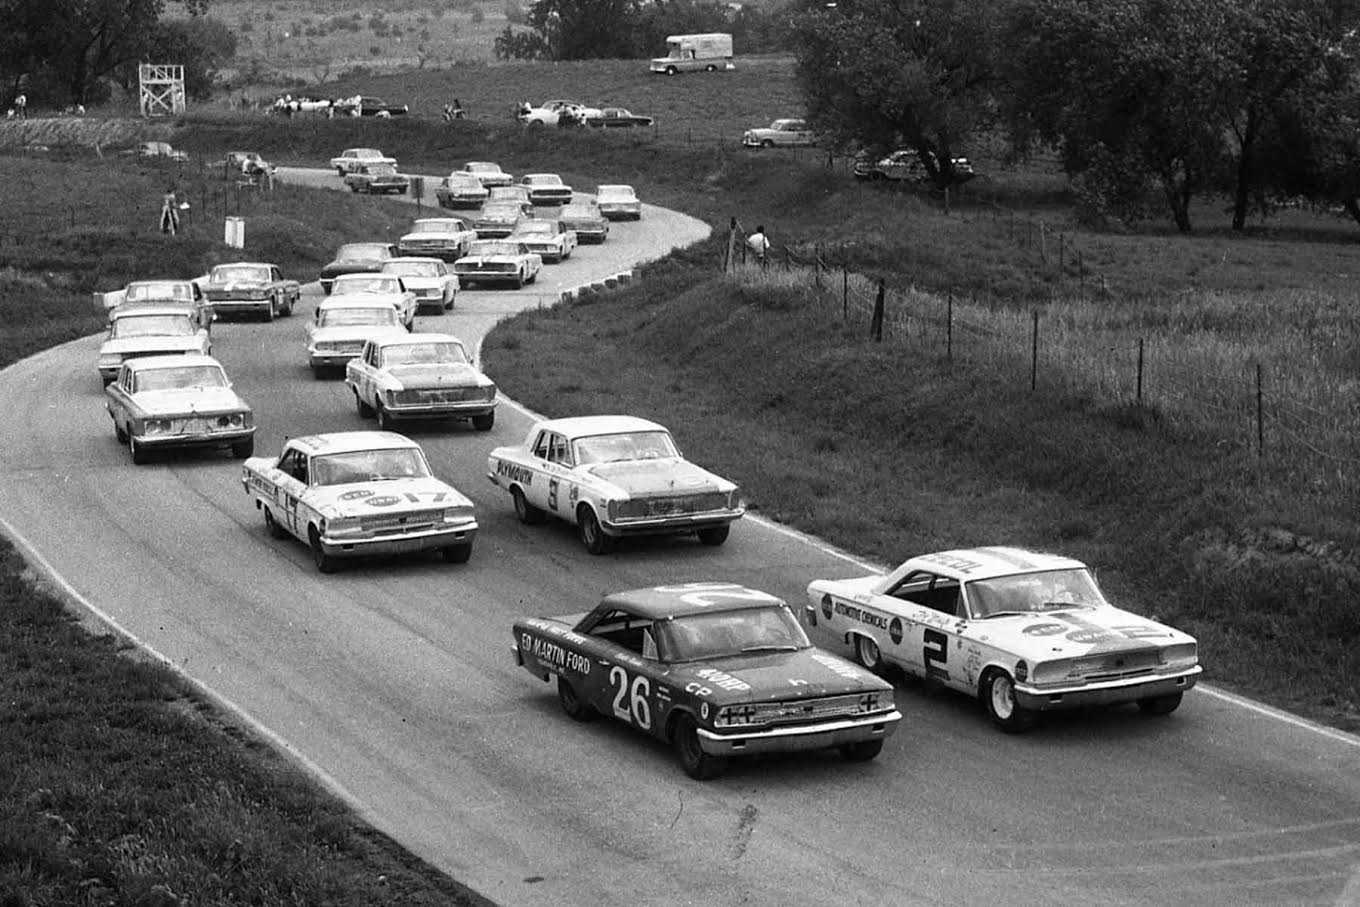 The field is lined up ready to go at Meadowdale for the scheduled 250-mile USAC Stock Car race. Row one has the 1963 Fords of Don White #2 and Curtis Turner #26. Row two is occupied by Norm Nelson #3 and Harry Heuer #17. [Photo by Russ Lake]